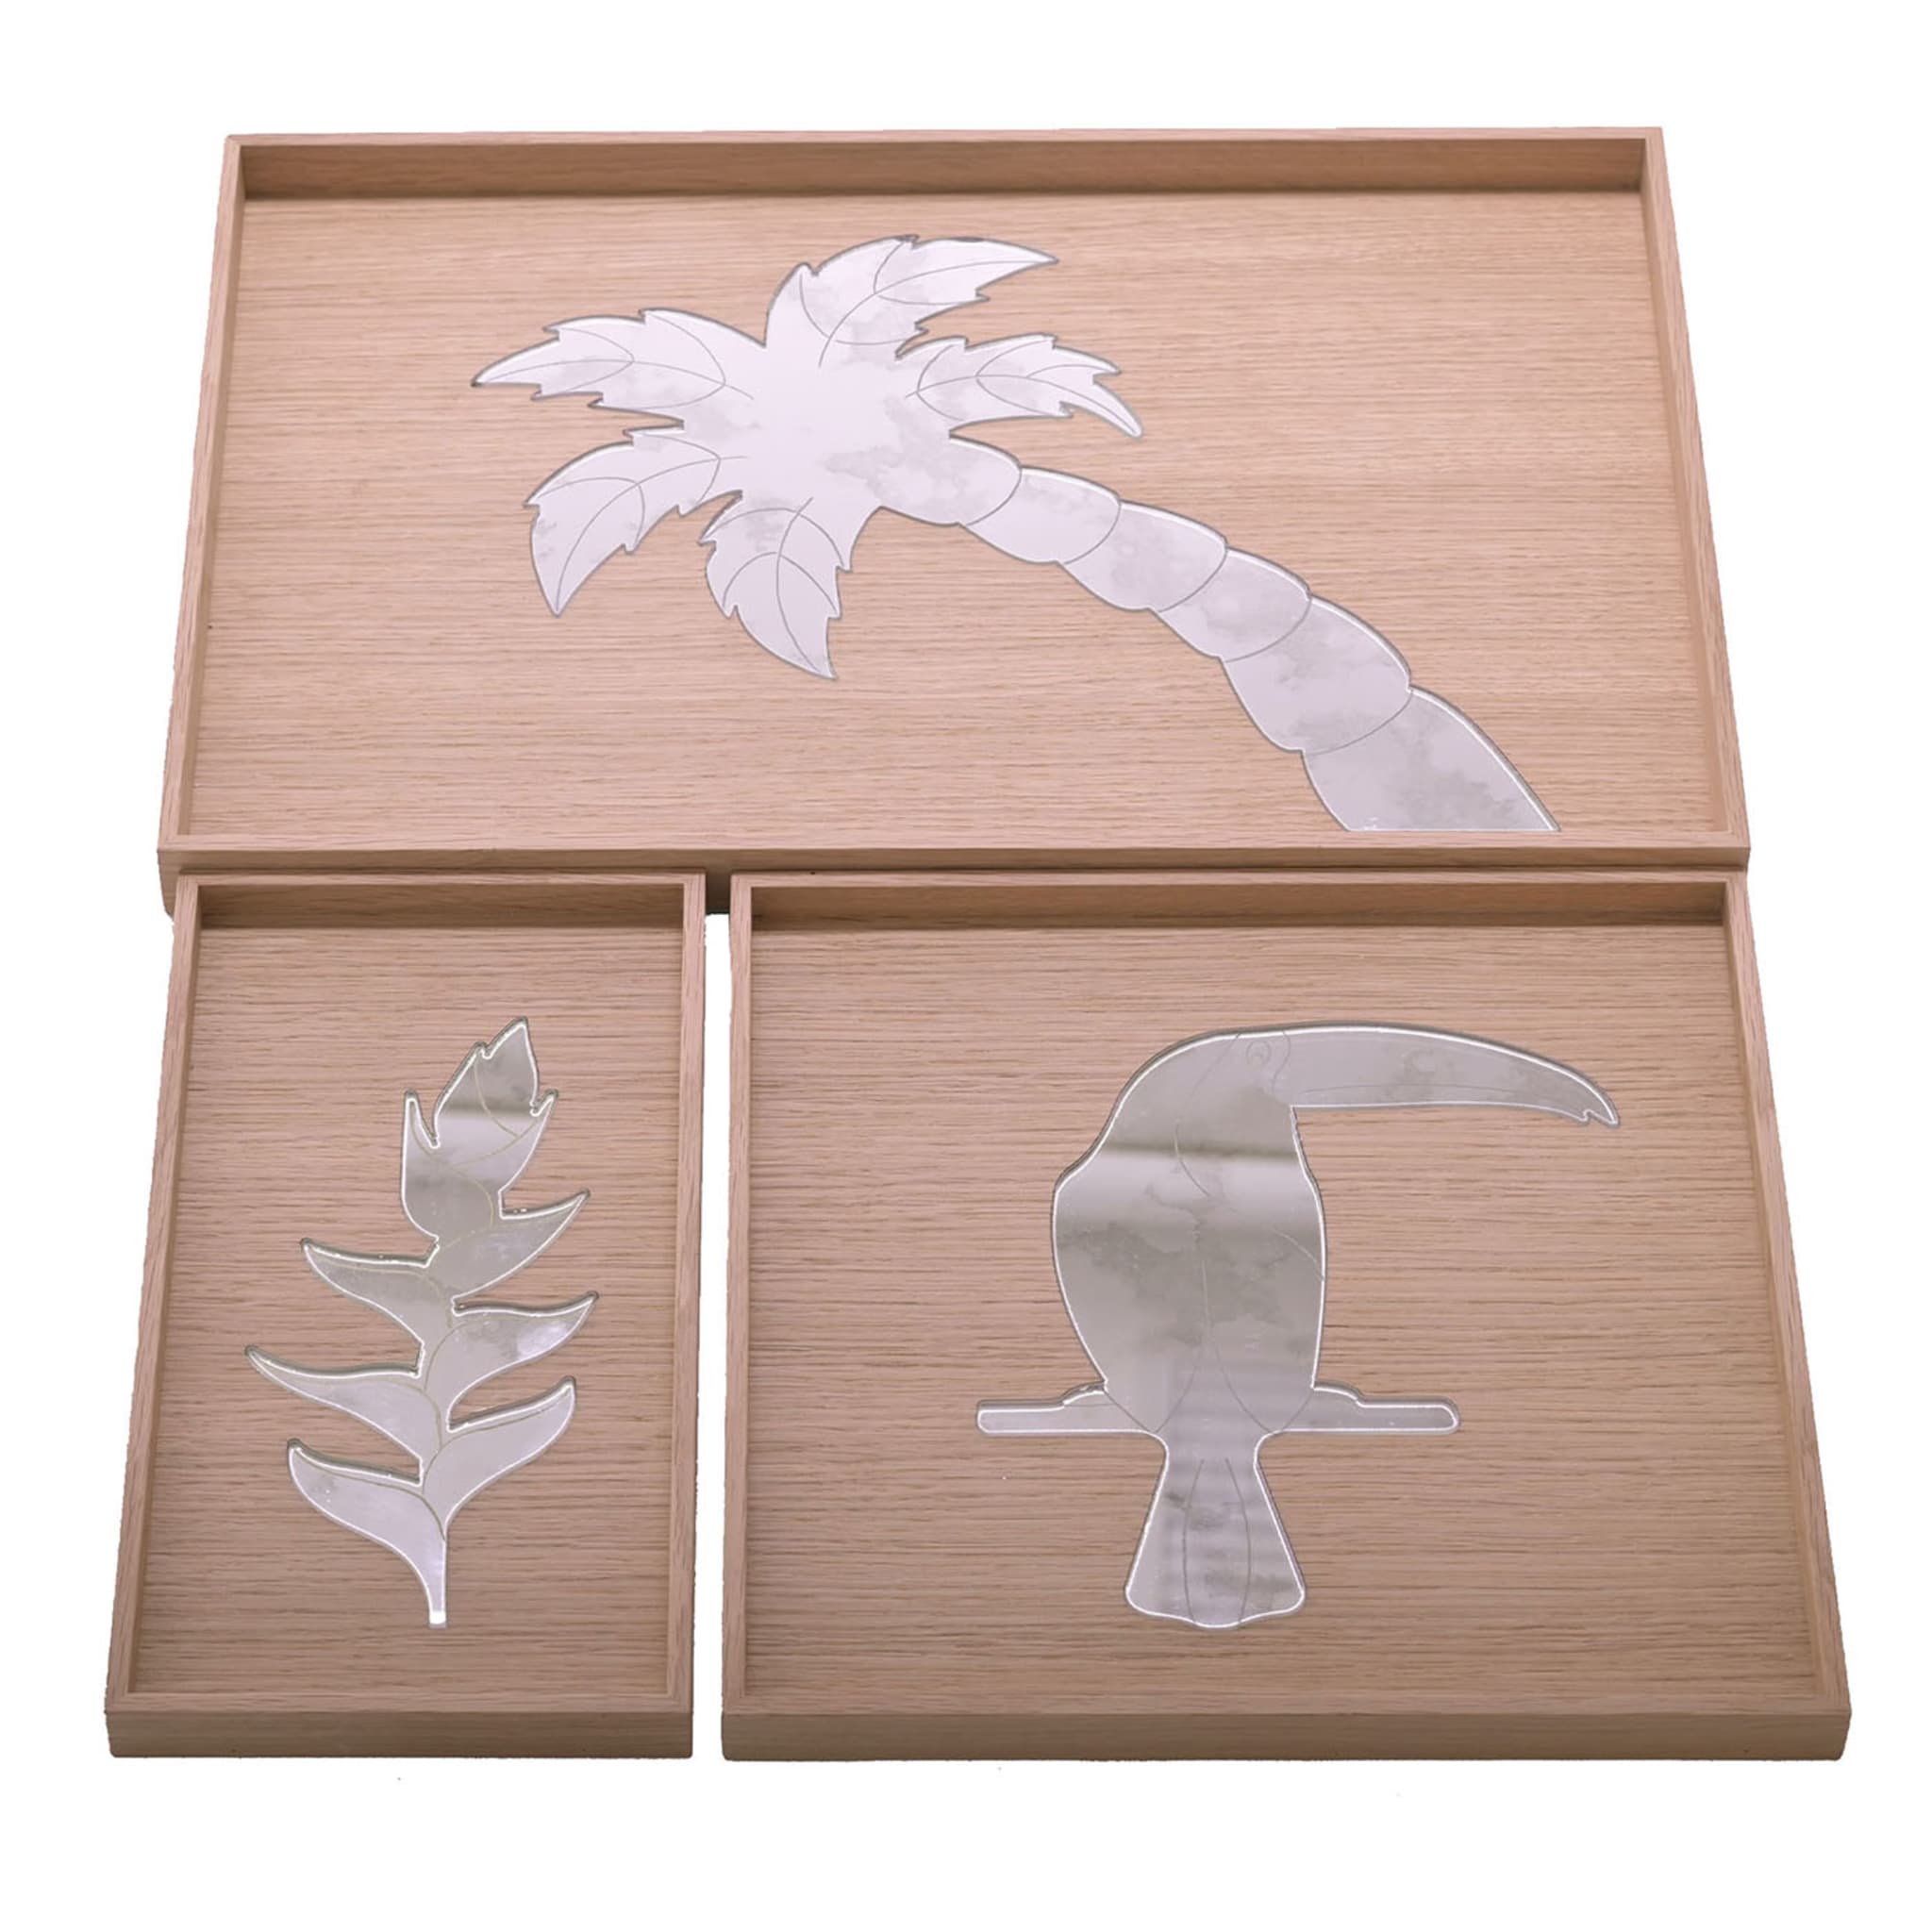 Casarialto Atelier TROPICAL REFLECTIONS SET OF 3 TRAYS by Giovanni Simionato - Main view